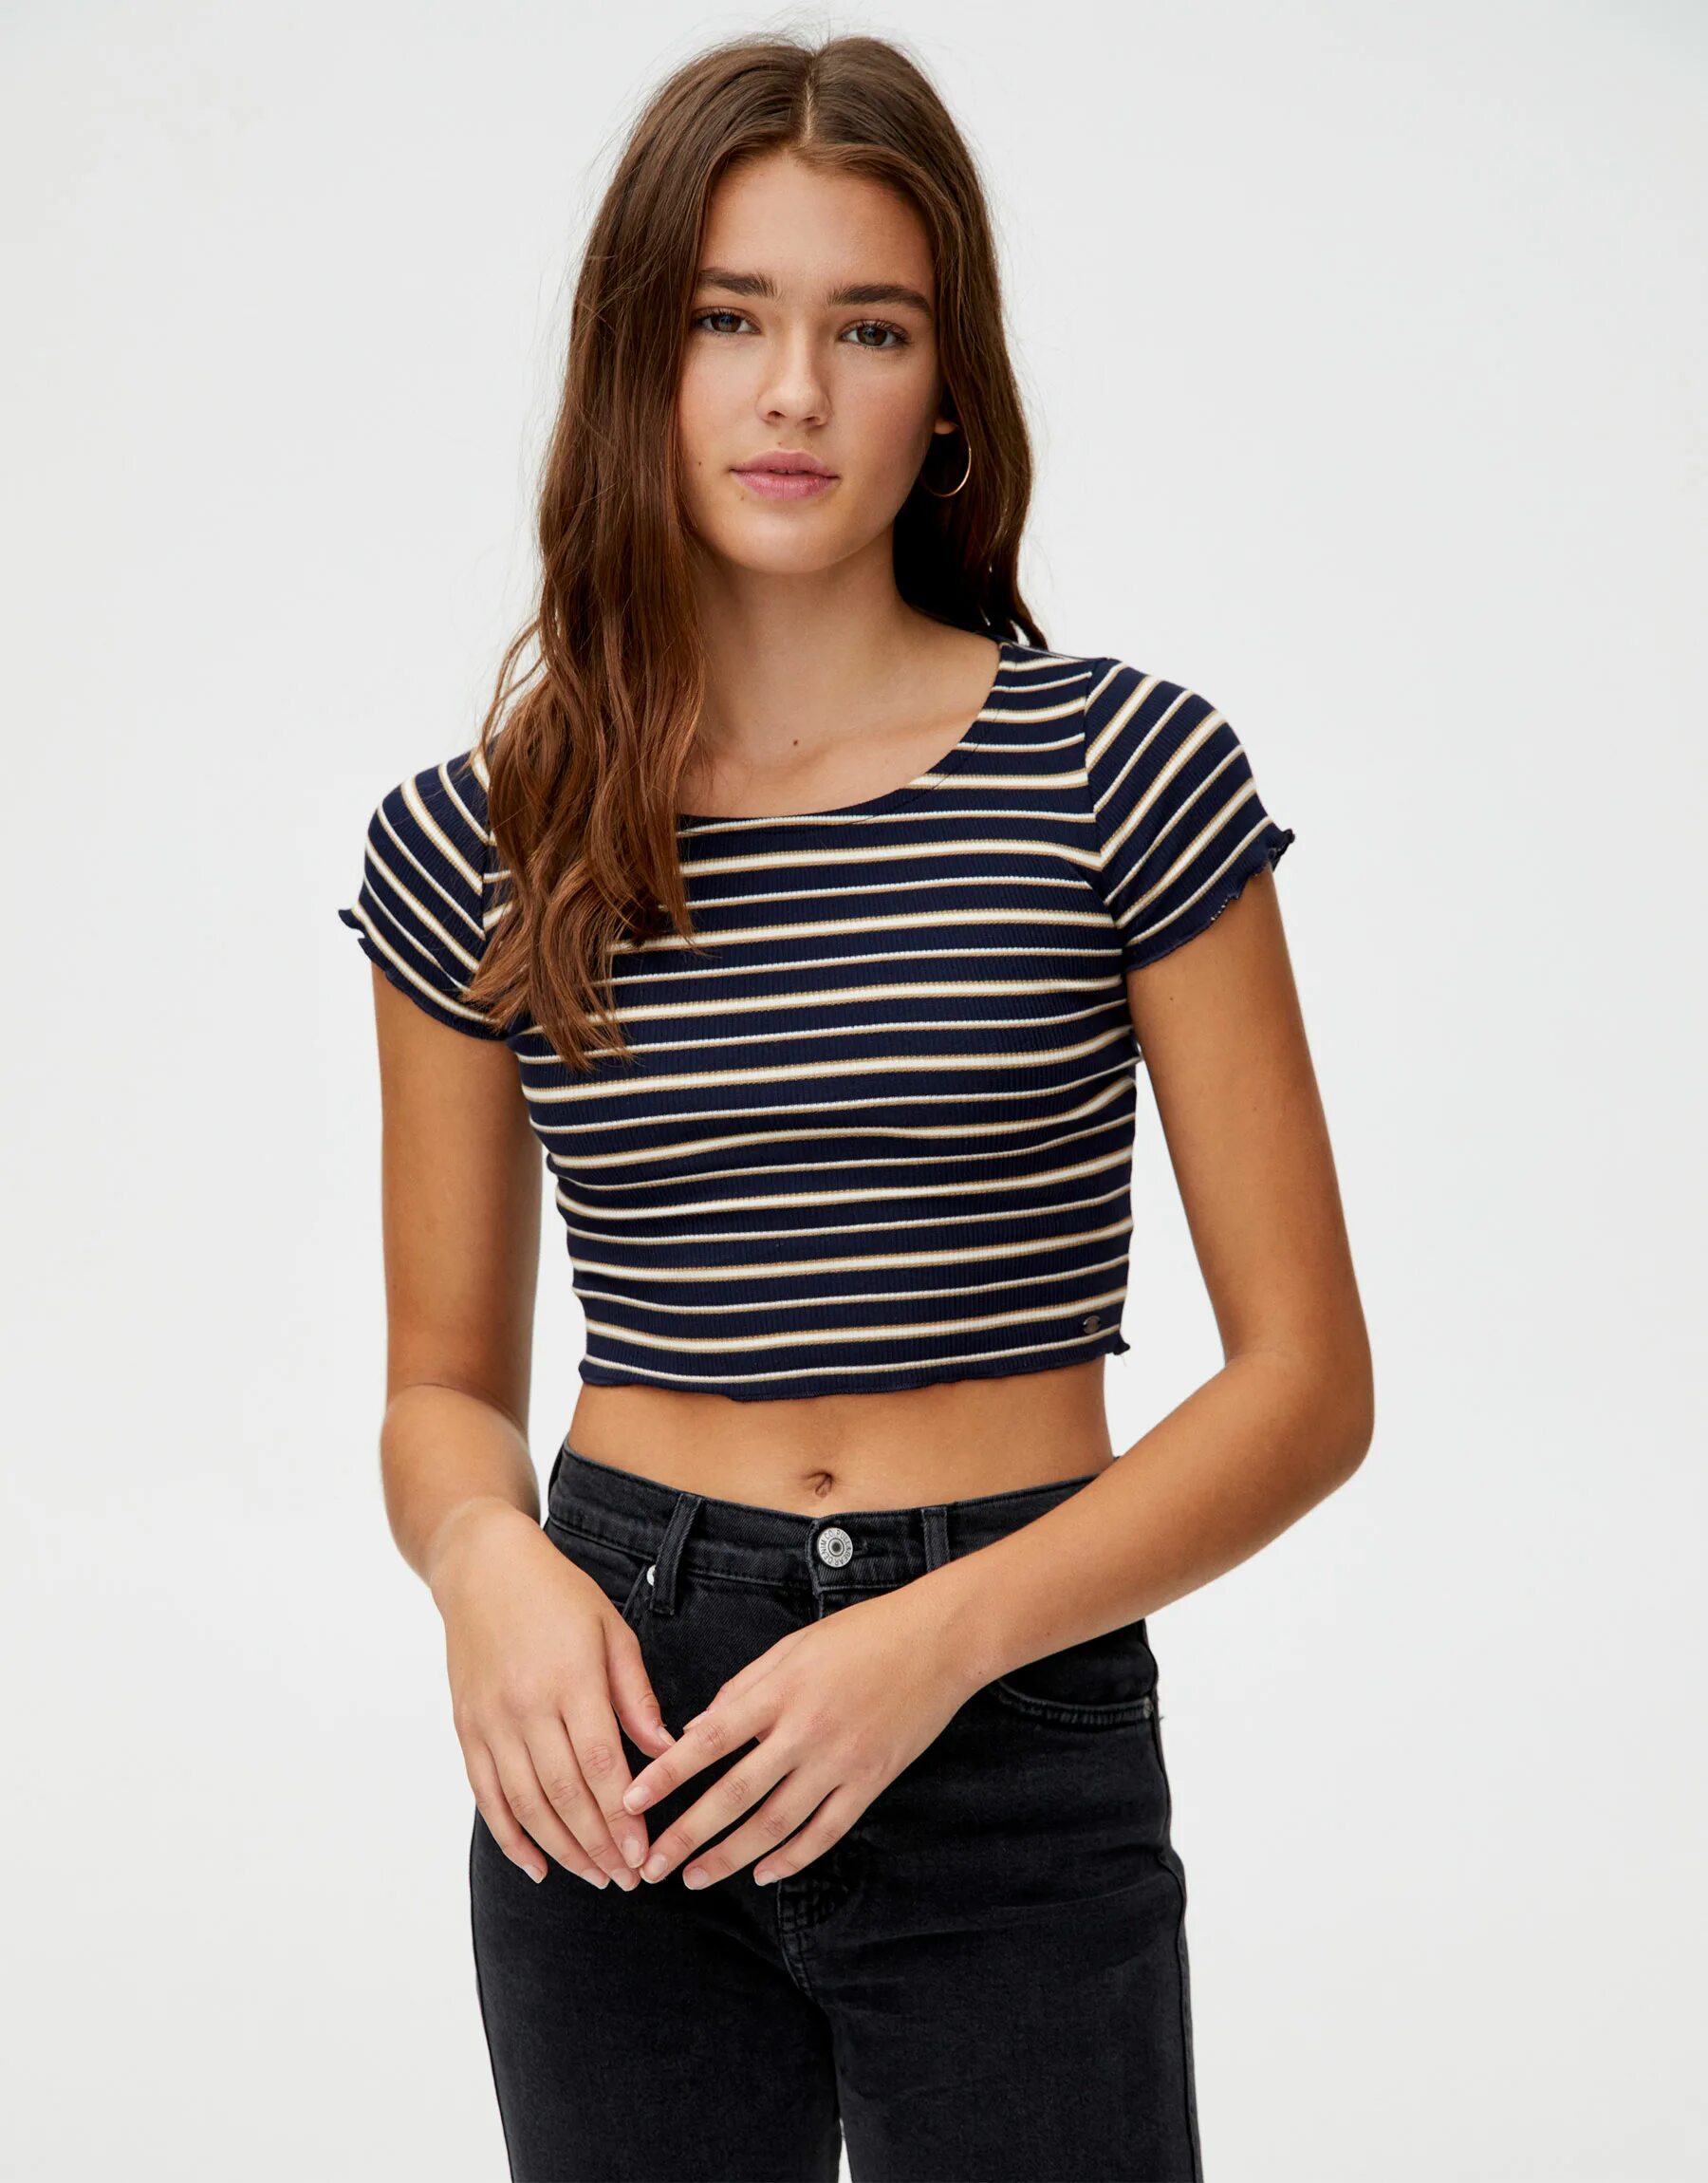 Pull and Bear Striped Ribbed Top. Топ Pull and Bear. Синий топ Pull Bear. Топ из нулевых.